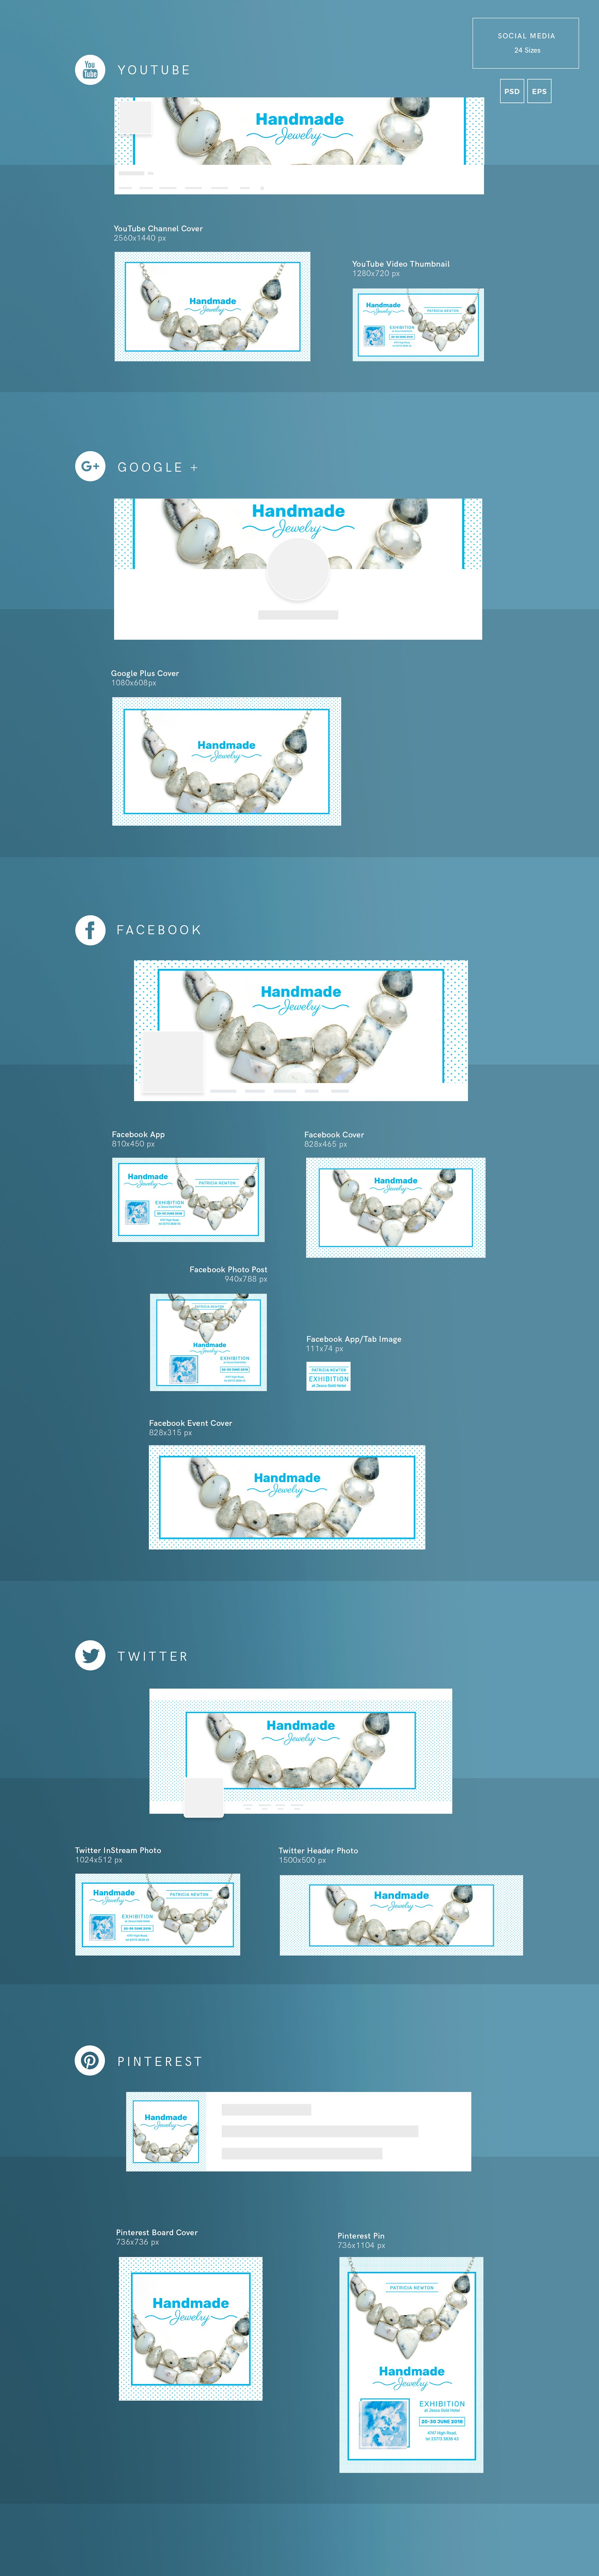 Social Media Pack | Handmade Jewelry preview image.